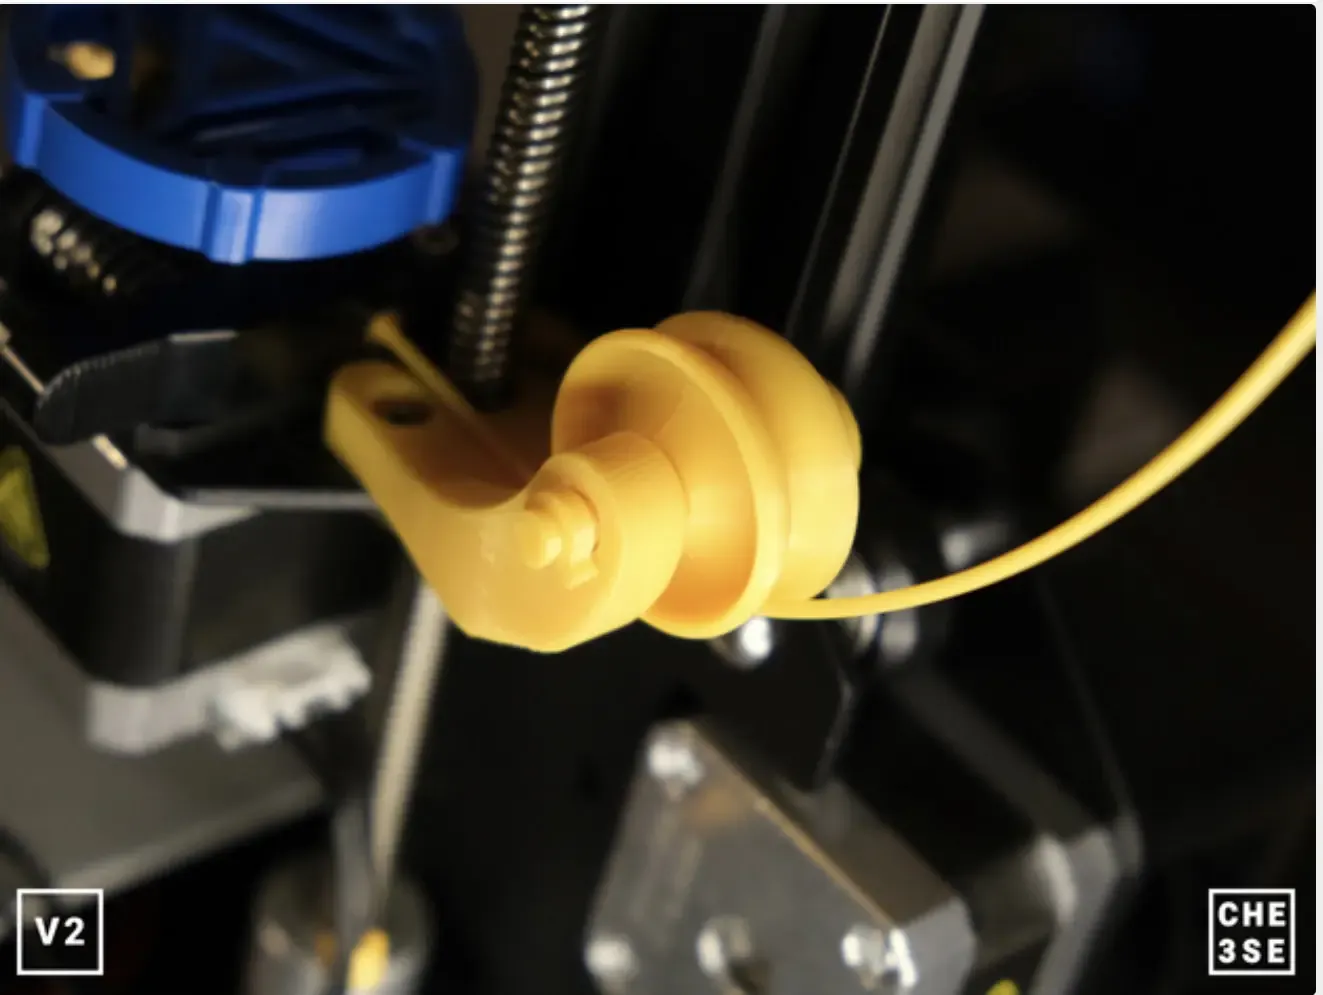 Filament guide for ender 3 V2/PRO from Thingyverse